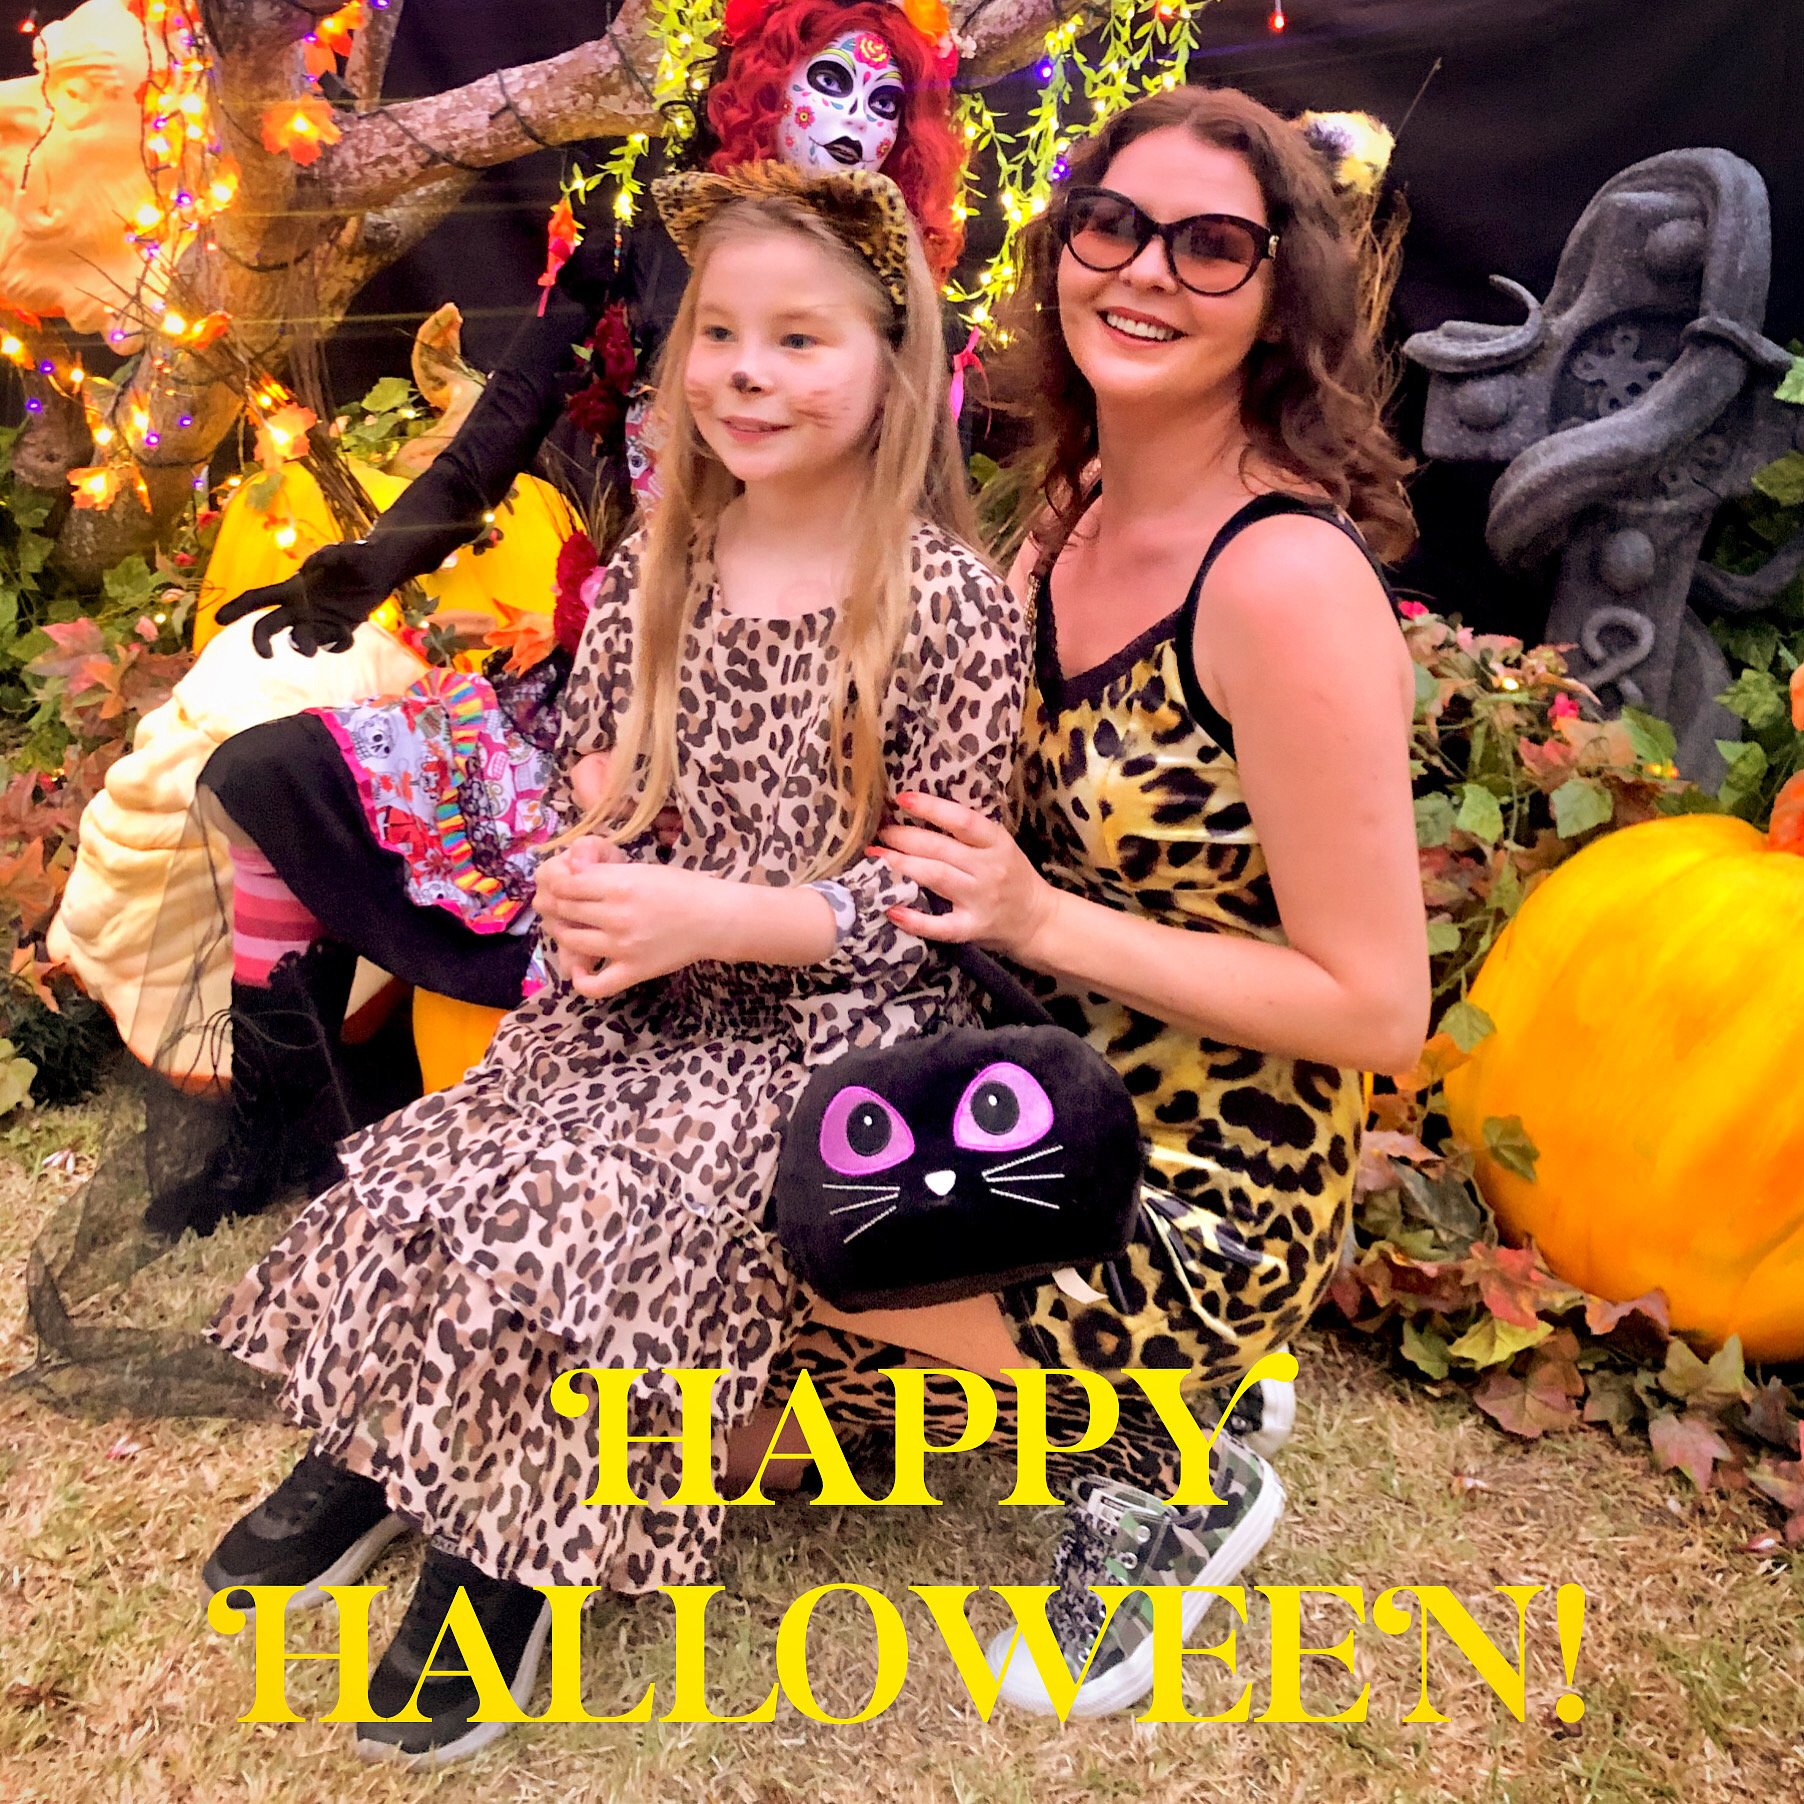 HAPPY HALLOWEEN! YOU HAVE THE POWER TO CREATE YOUR OWN MAGIC EVERY DAY!